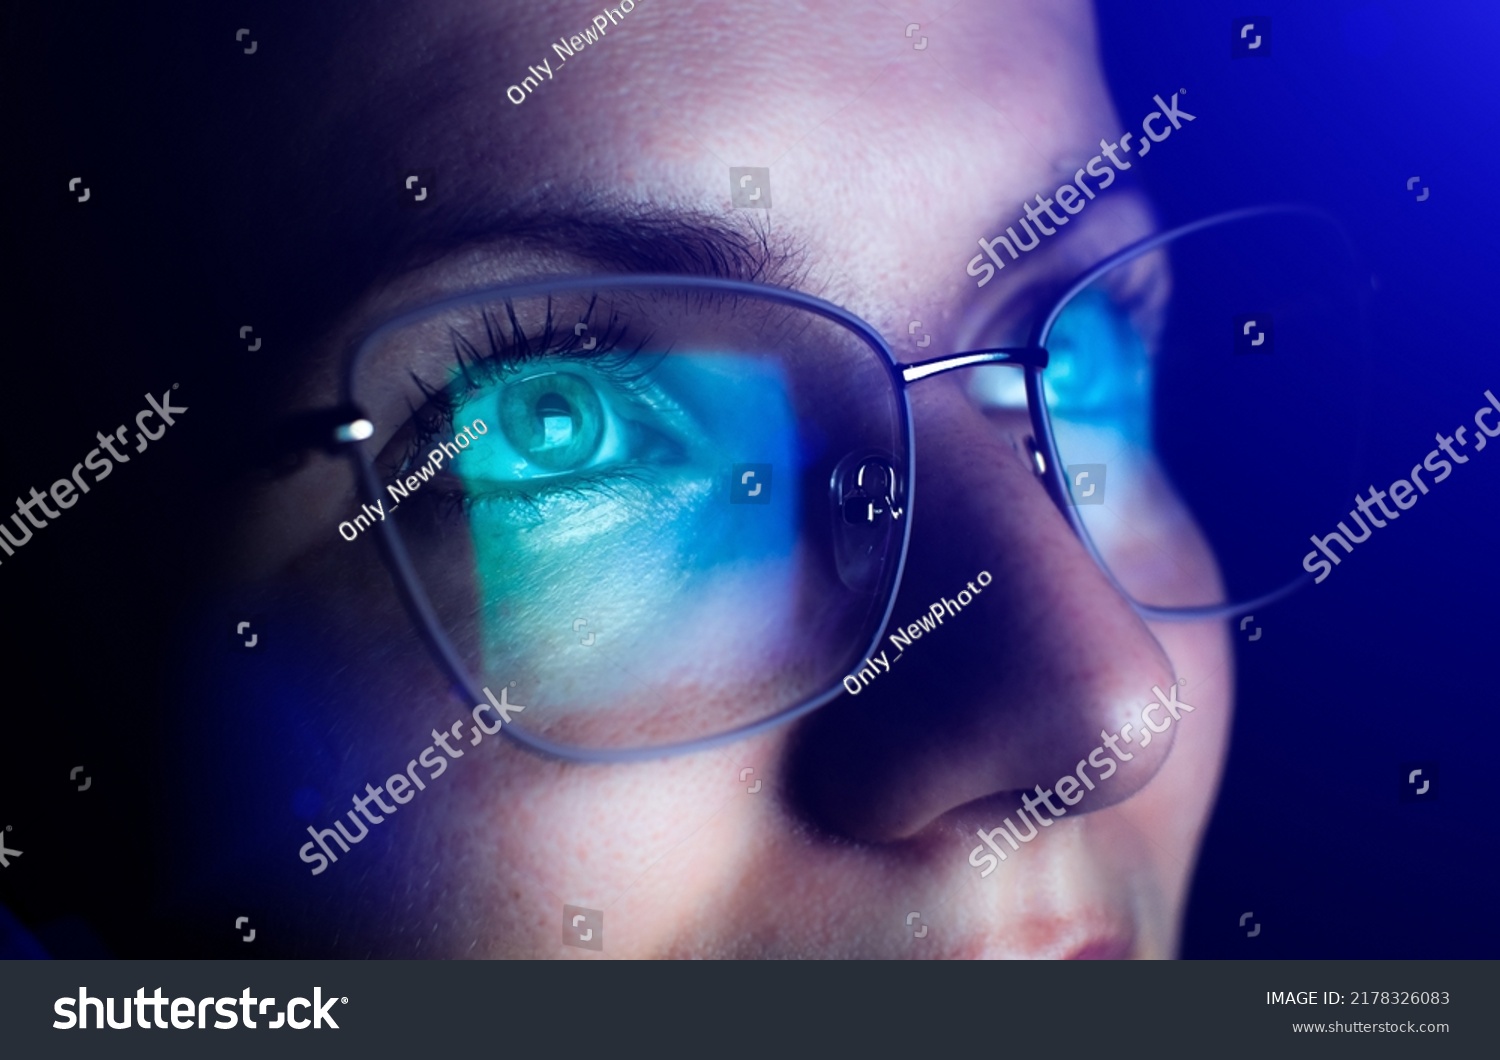 Girl works on internet. Reflection at the glasses from laptop.Close up of woman's eyes with black female glasses for working at a computer. Eye protection from blue light and rays. #2178326083